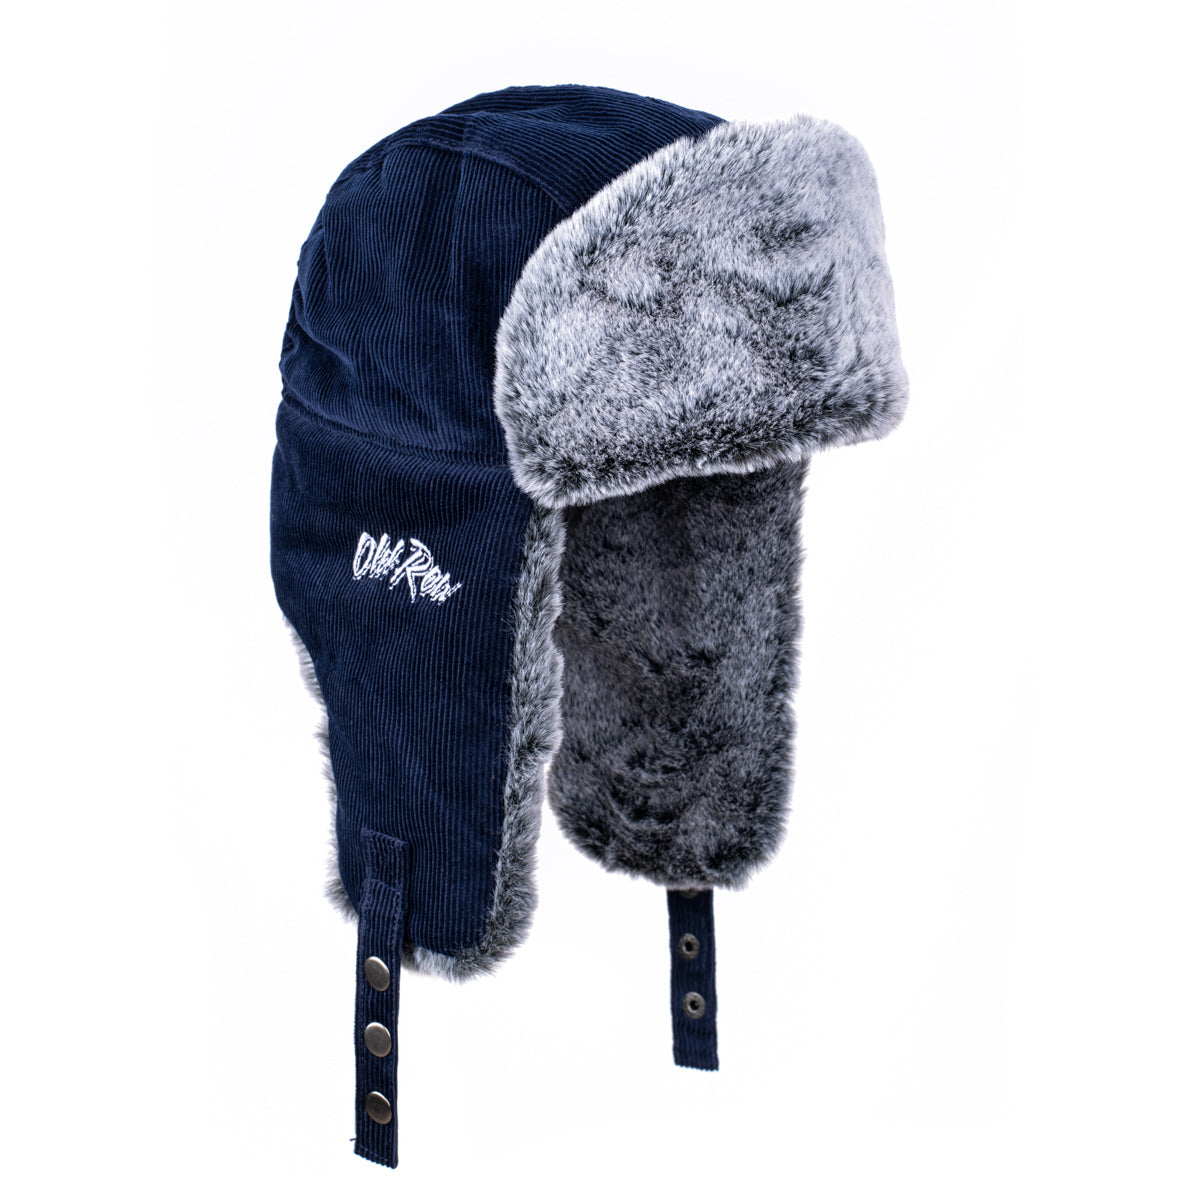 Old Row Corduroy Trapper Hat - Old Row Beanies, Clothing & Merch